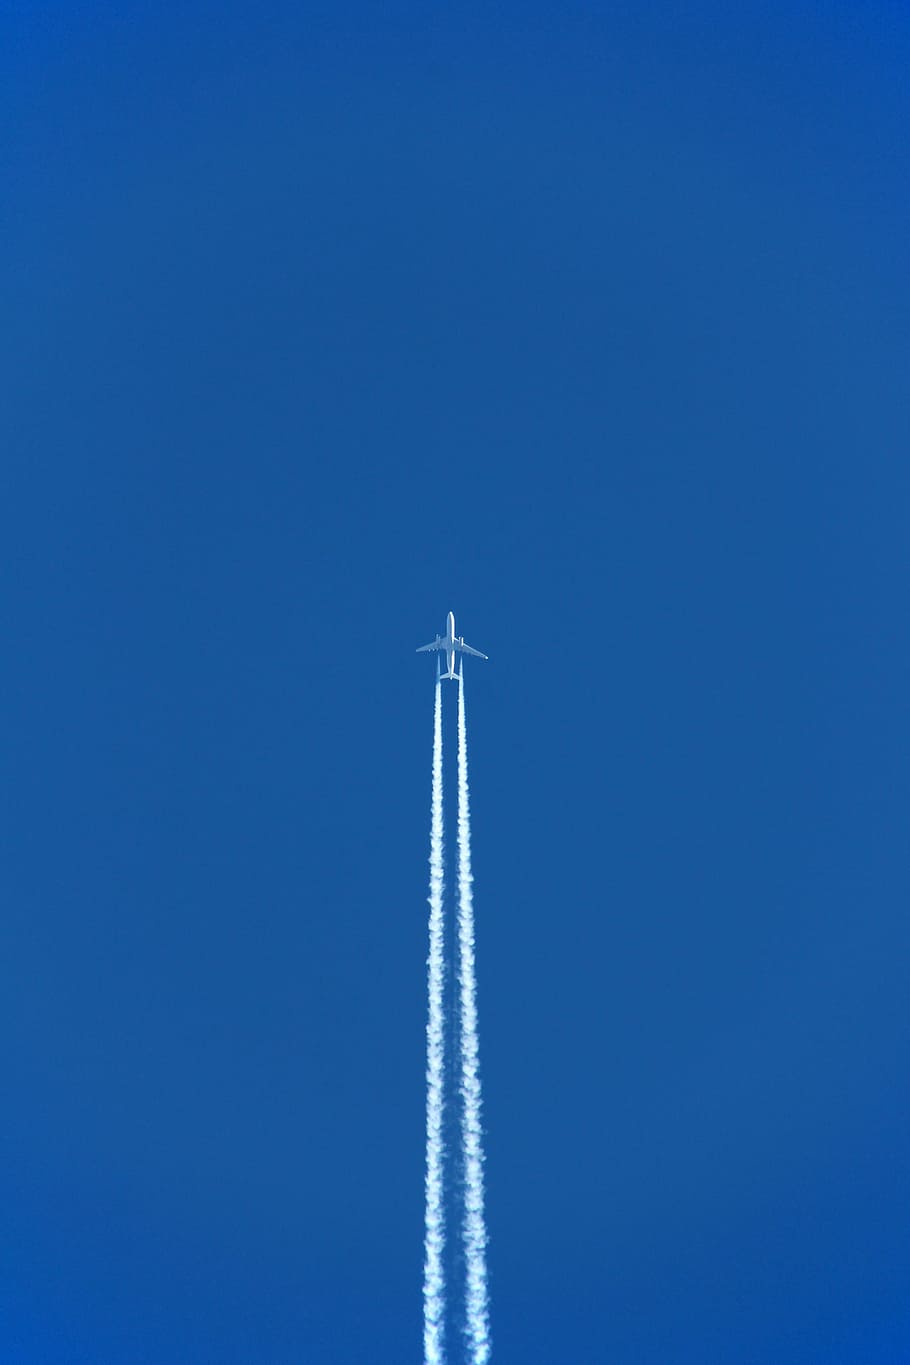 white, jet plane, blue, sky, daytime, aircraft, aircraft noise, contrail, flight, holiday